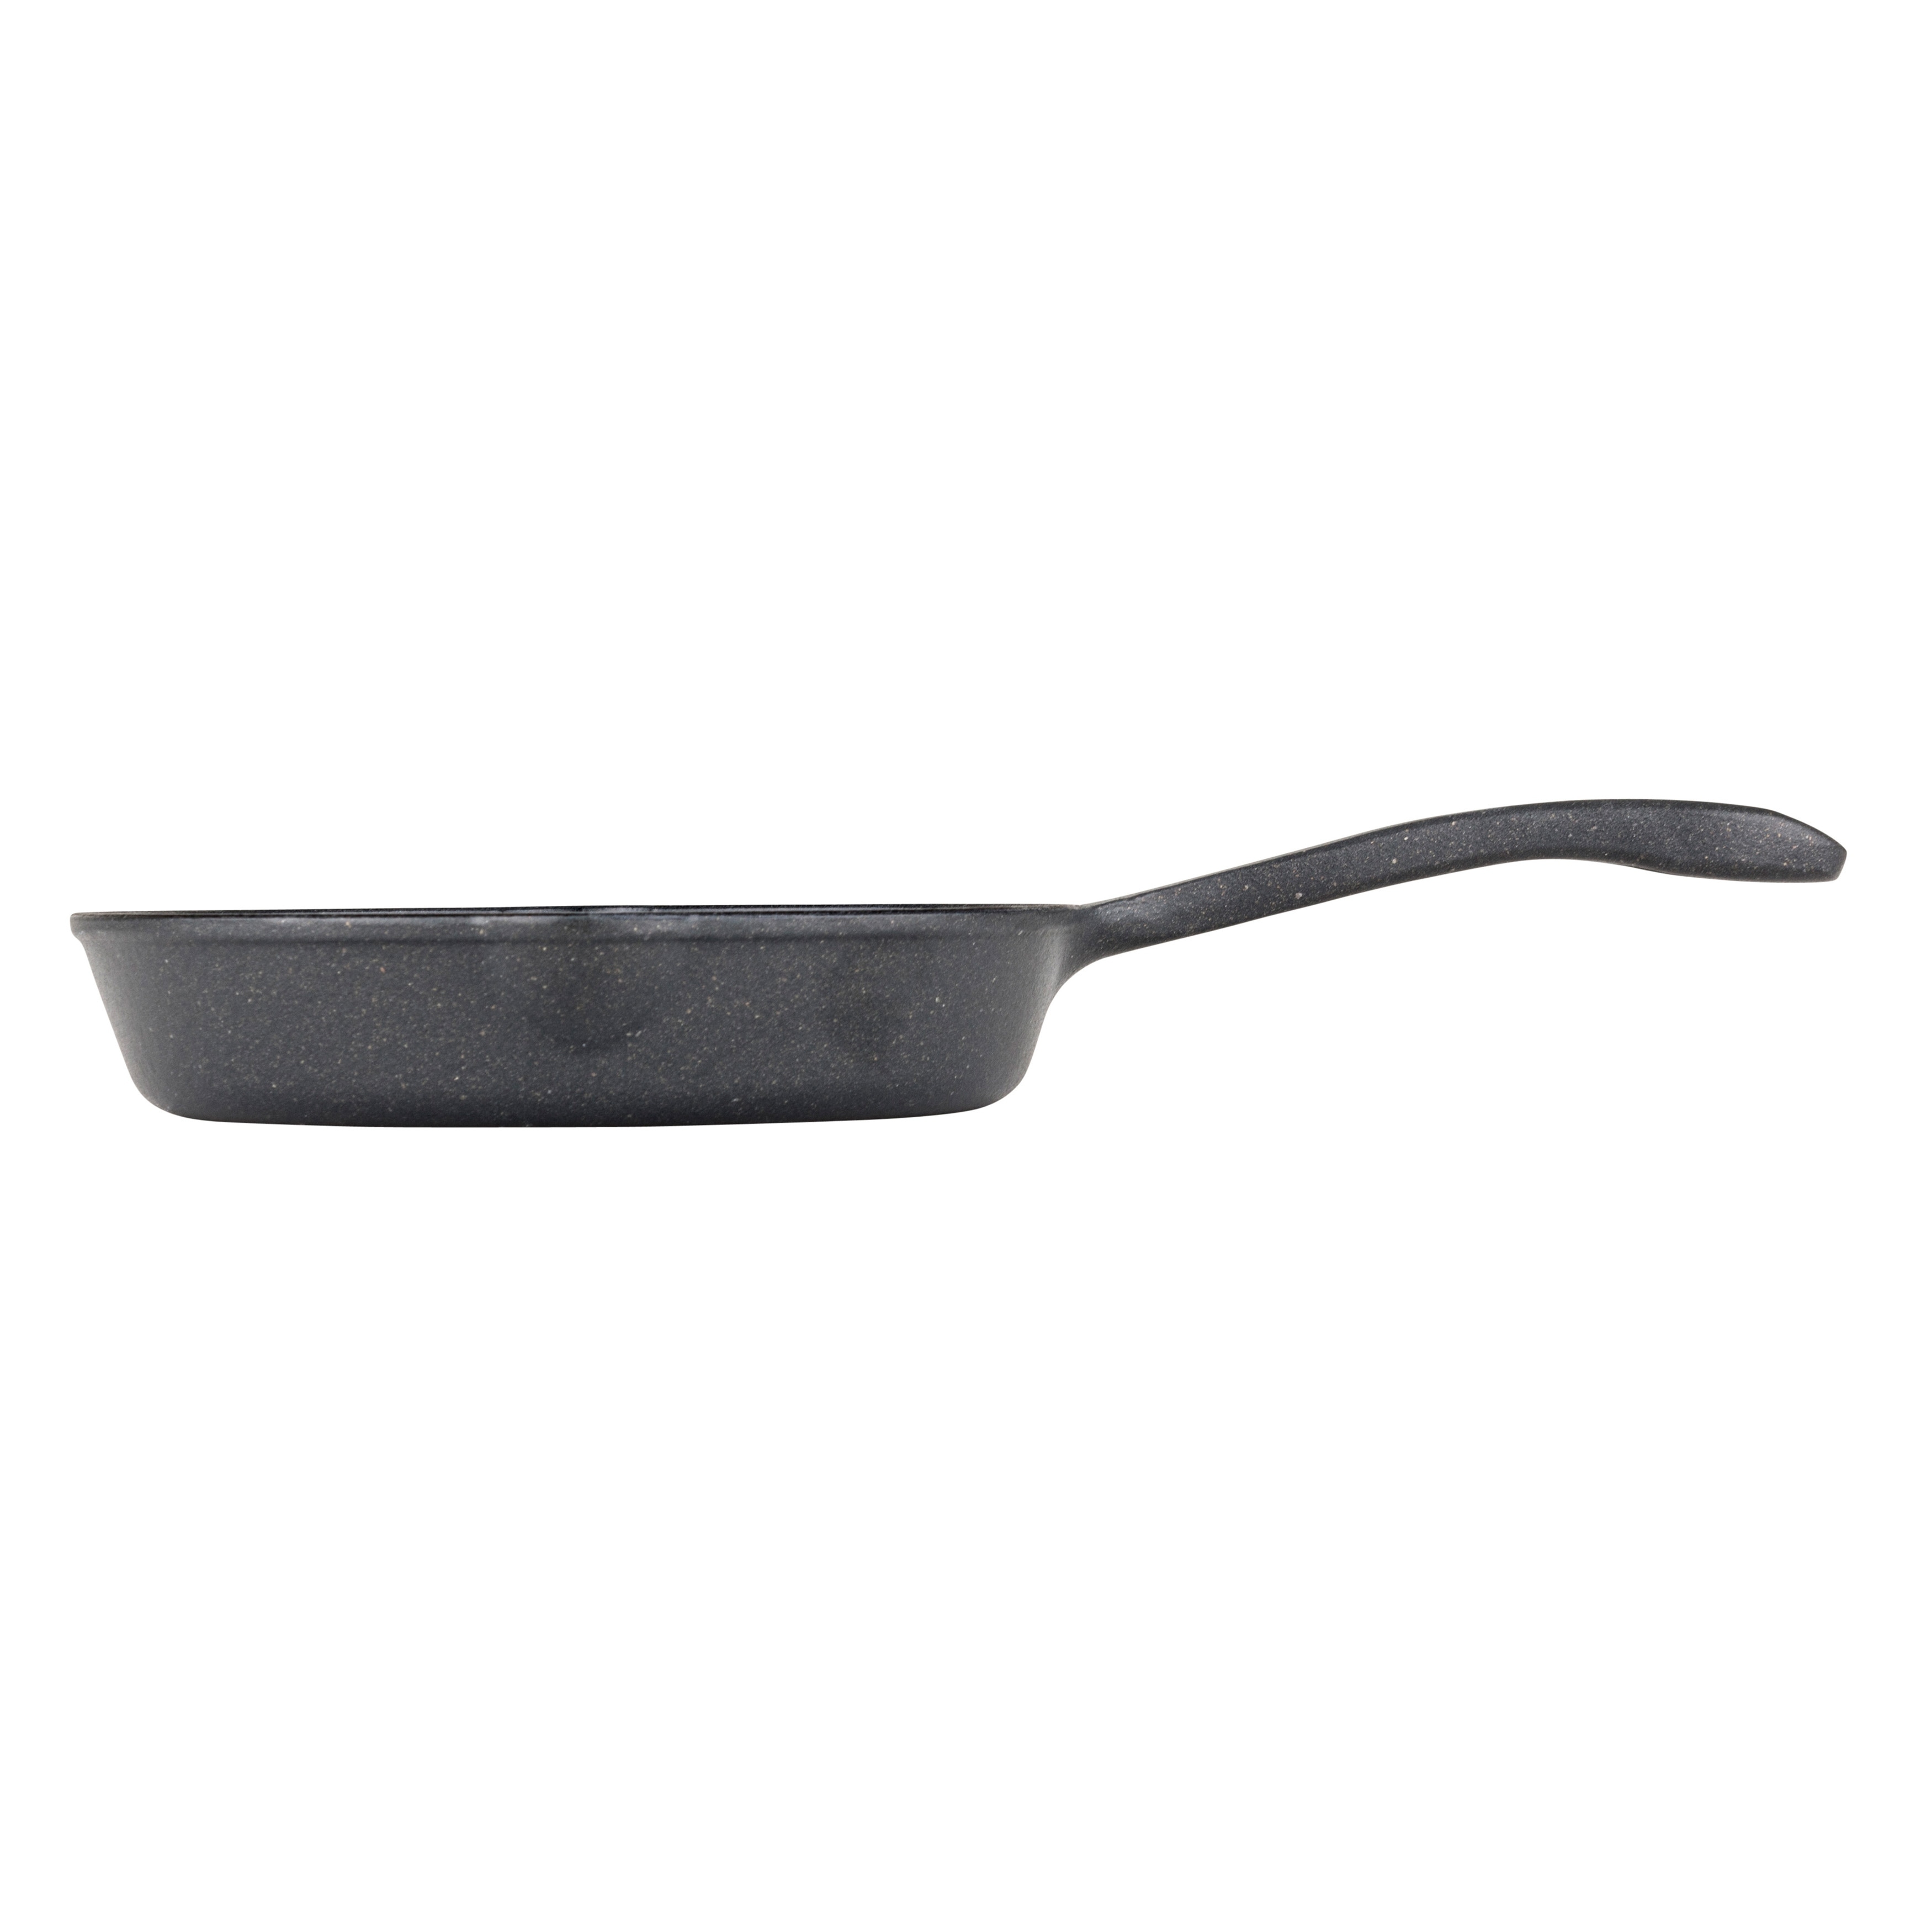 https://ak1.ostkcdn.com/images/products/is/images/direct/fad261c0a142d8ee01c57939d04c7ff832e600b6/Viking-Cast-Iron-8-inch-Fry-Pan%2C-Charcoal.jpg